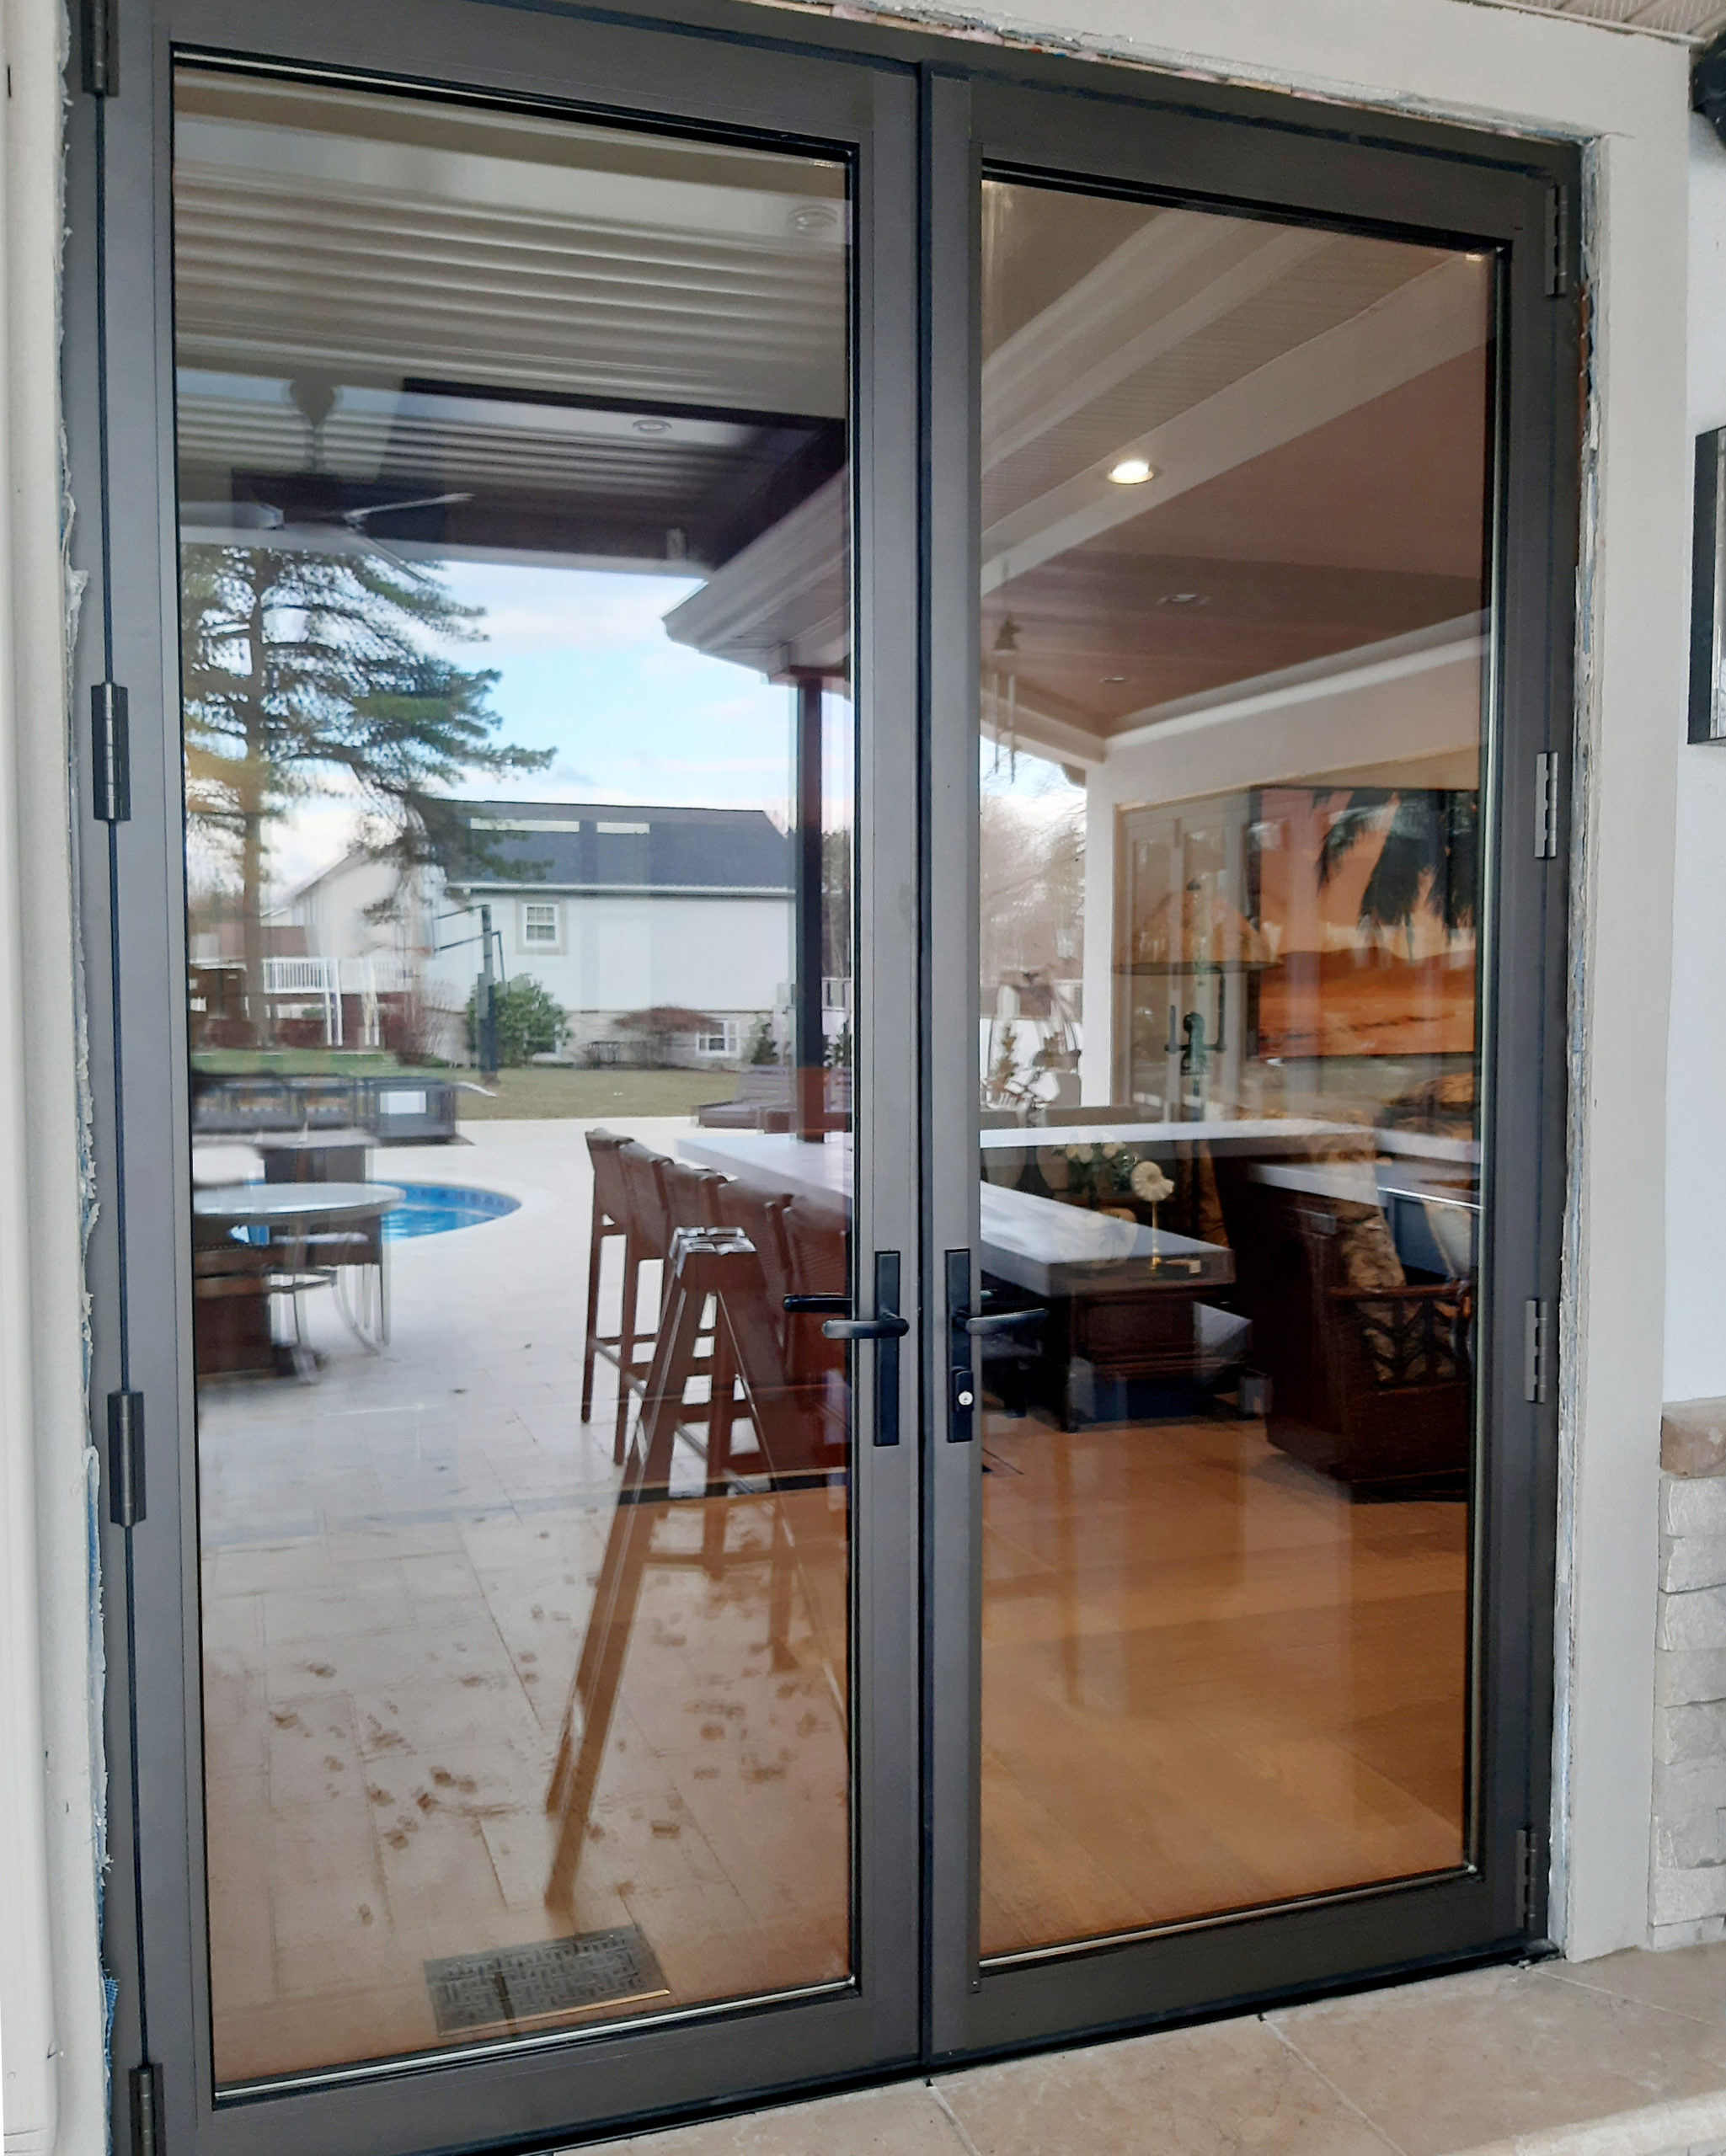 One G2 outswing French door (pictured), one G2 outswing terrace door, one three-panel G2 infold all-wall bifold door unit, and one seven-panel G2 infold split-wall bifold door/window unit.